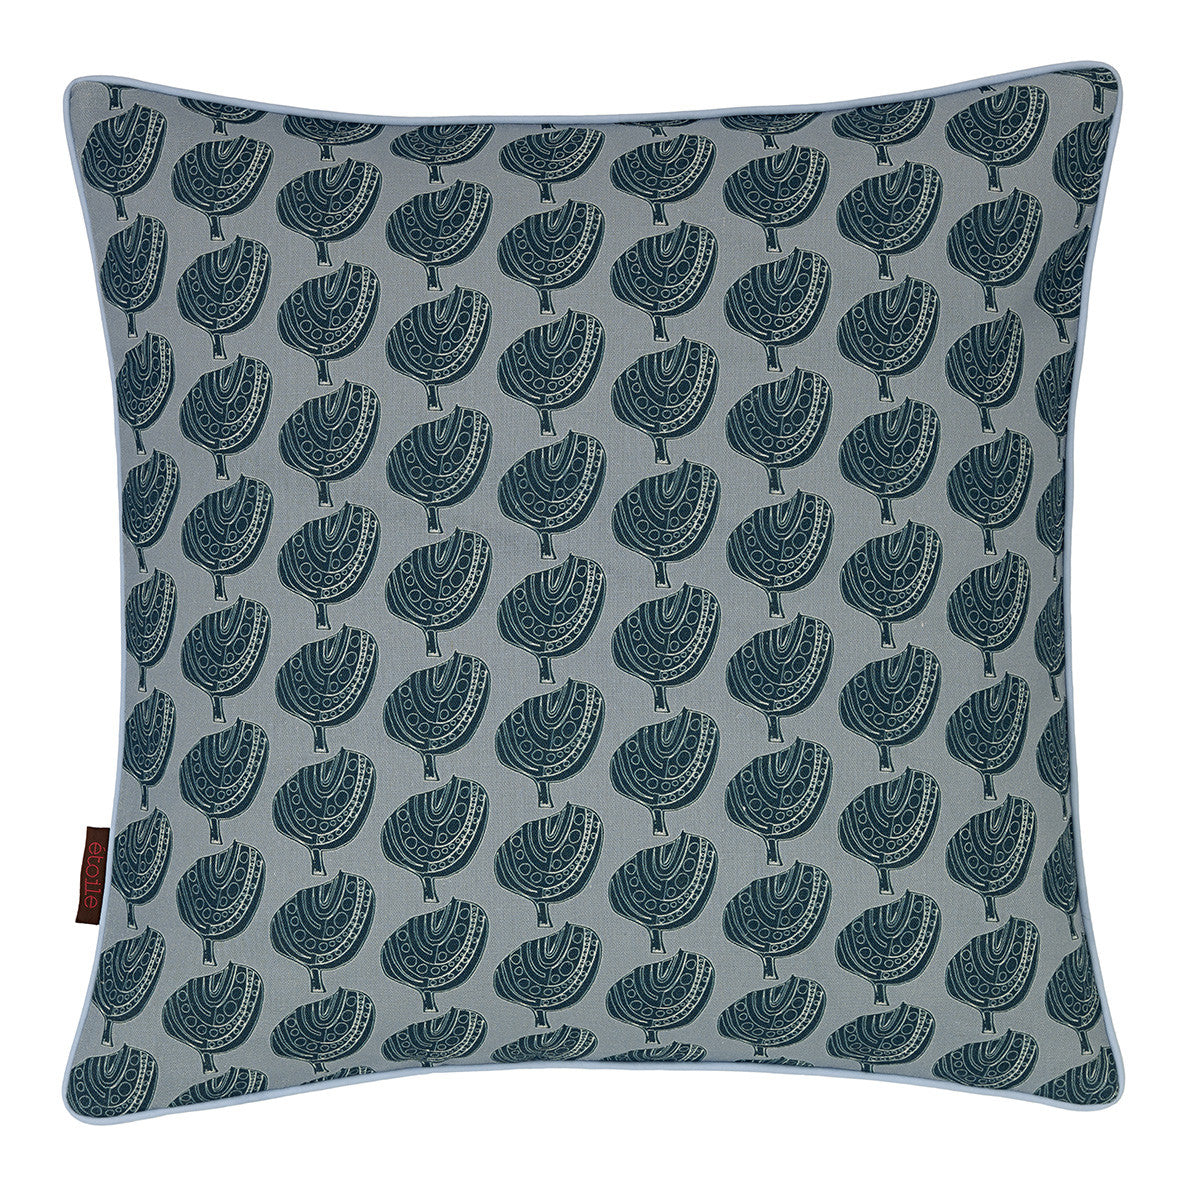 Graphic Apple Tree Pattern Printed Linen Union decorative Throw Pillow in Light Winter Blue and Petrol Blue 45x45cm (18x18")